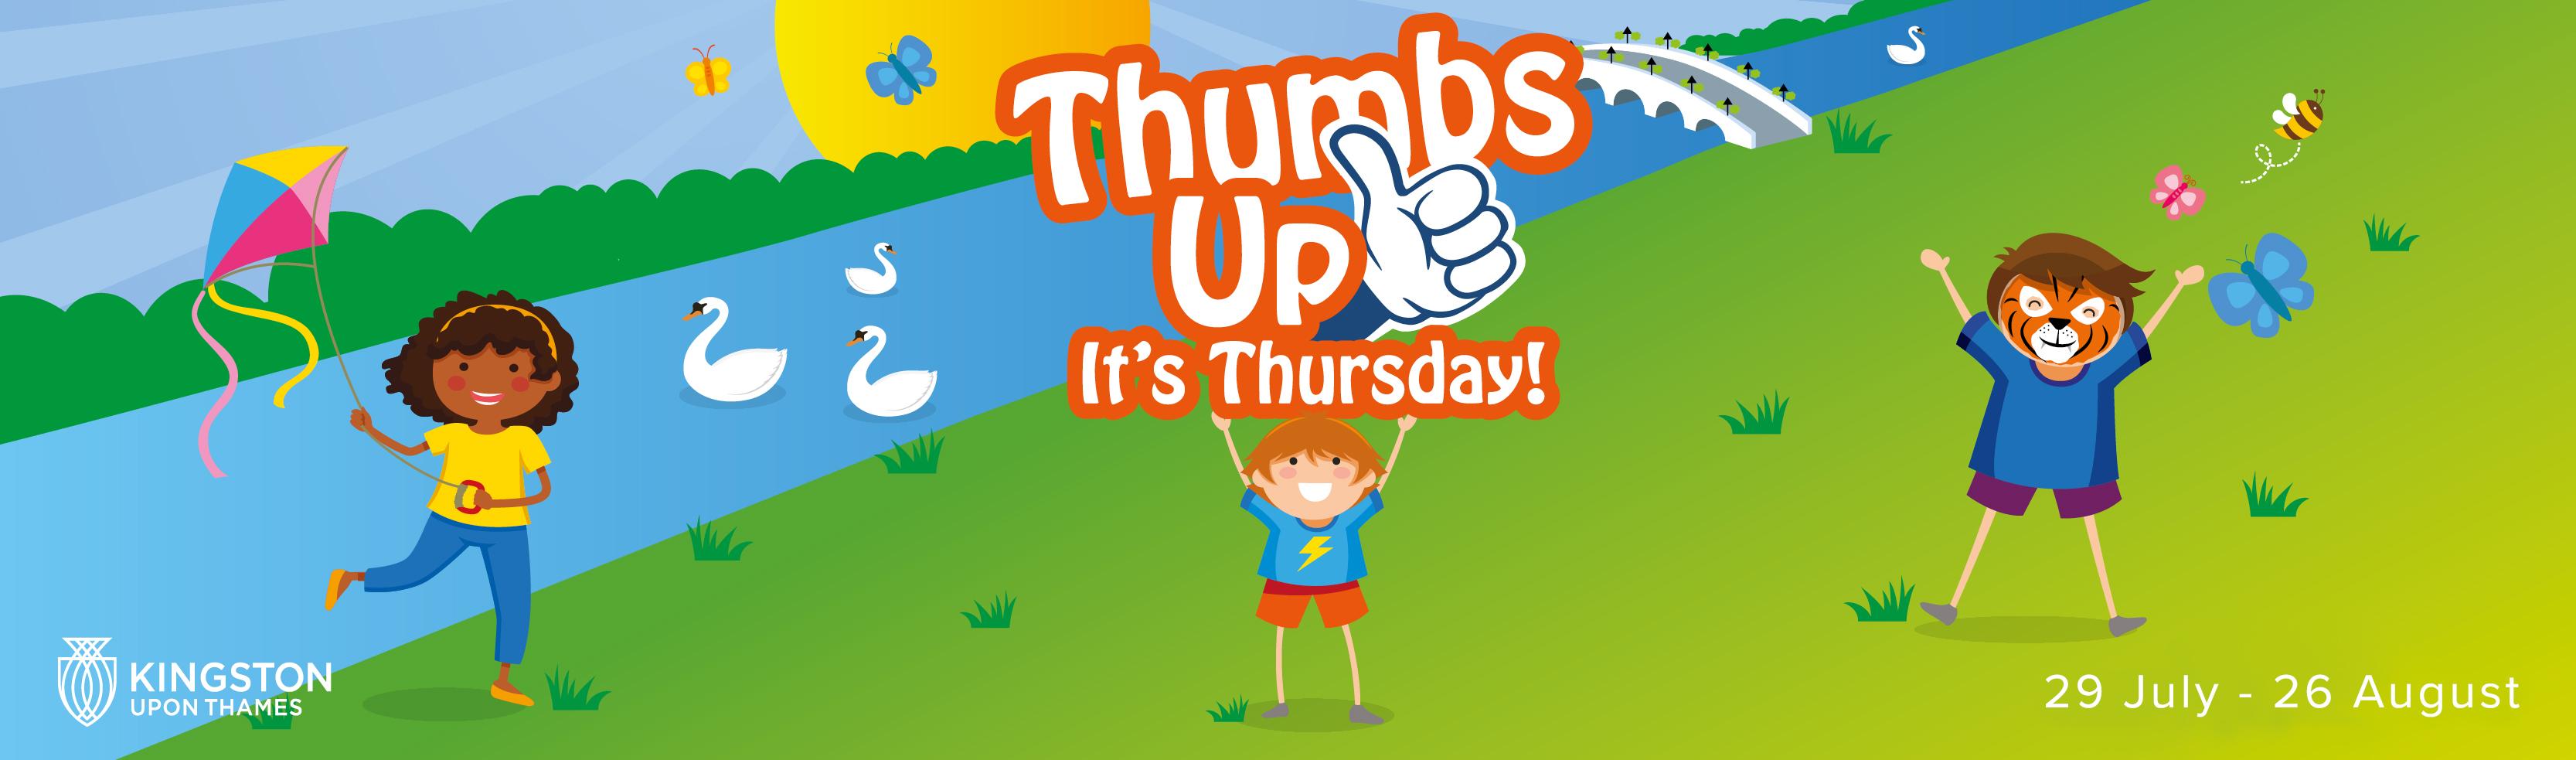 A digital illustration of children playing near the river Thames in Kingston next to the Thumbs Up it's Thursday logo